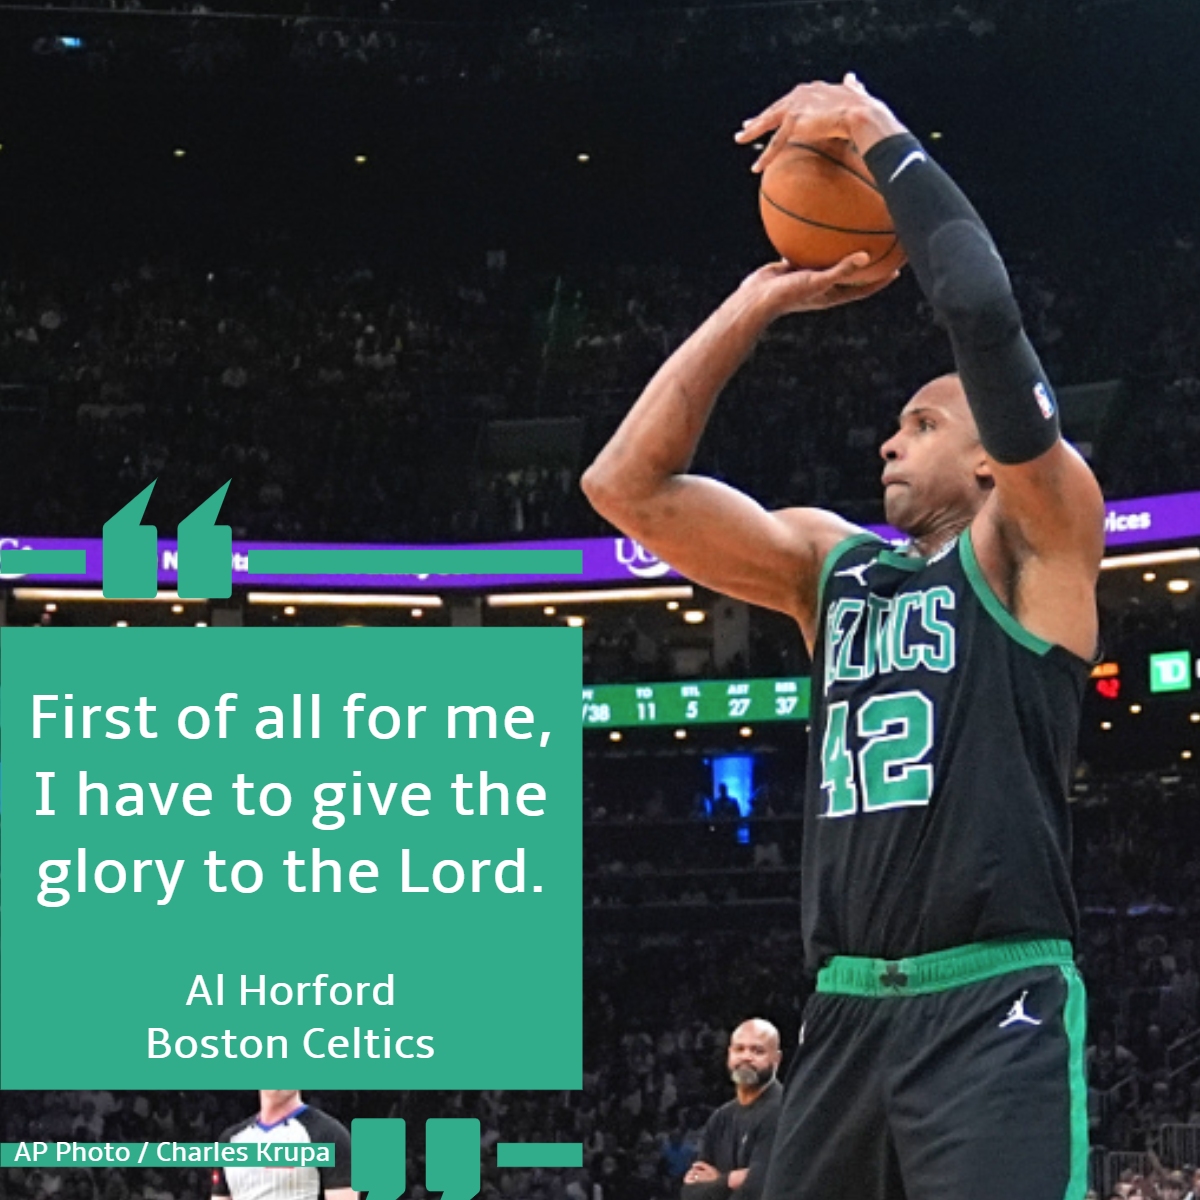 Al Horford... your 23 point, 15 rebound effort helped #Celtics advance to their third straight Eastern Conference Finals. Who gets the glory? #NBA #basketball #faith